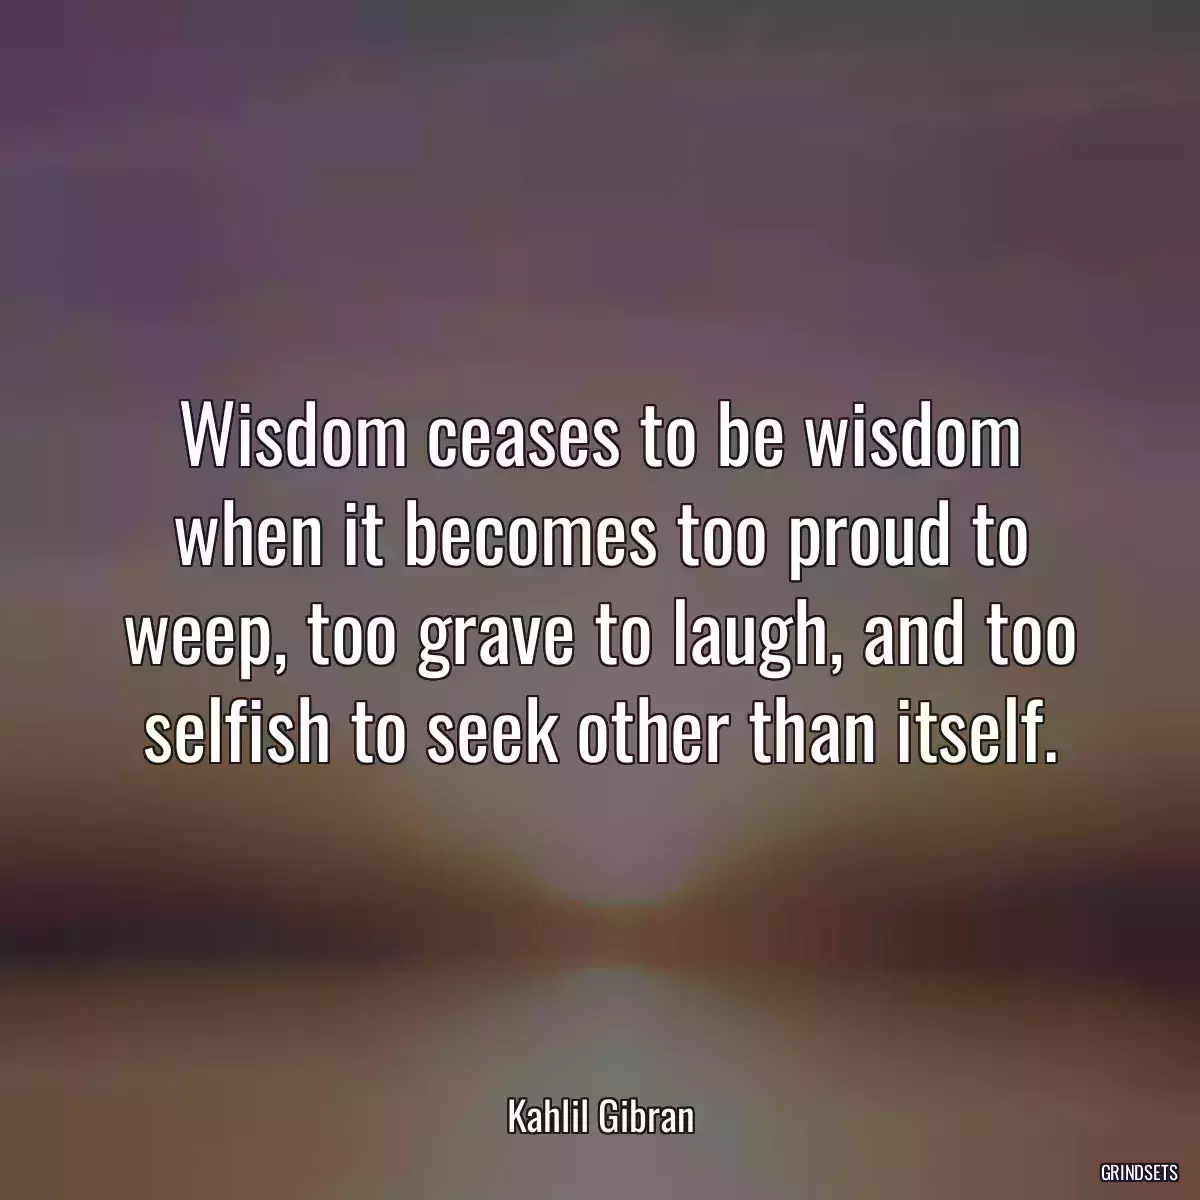 Wisdom ceases to be wisdom when it becomes too proud to weep, too grave to laugh, and too selfish to seek other than itself.